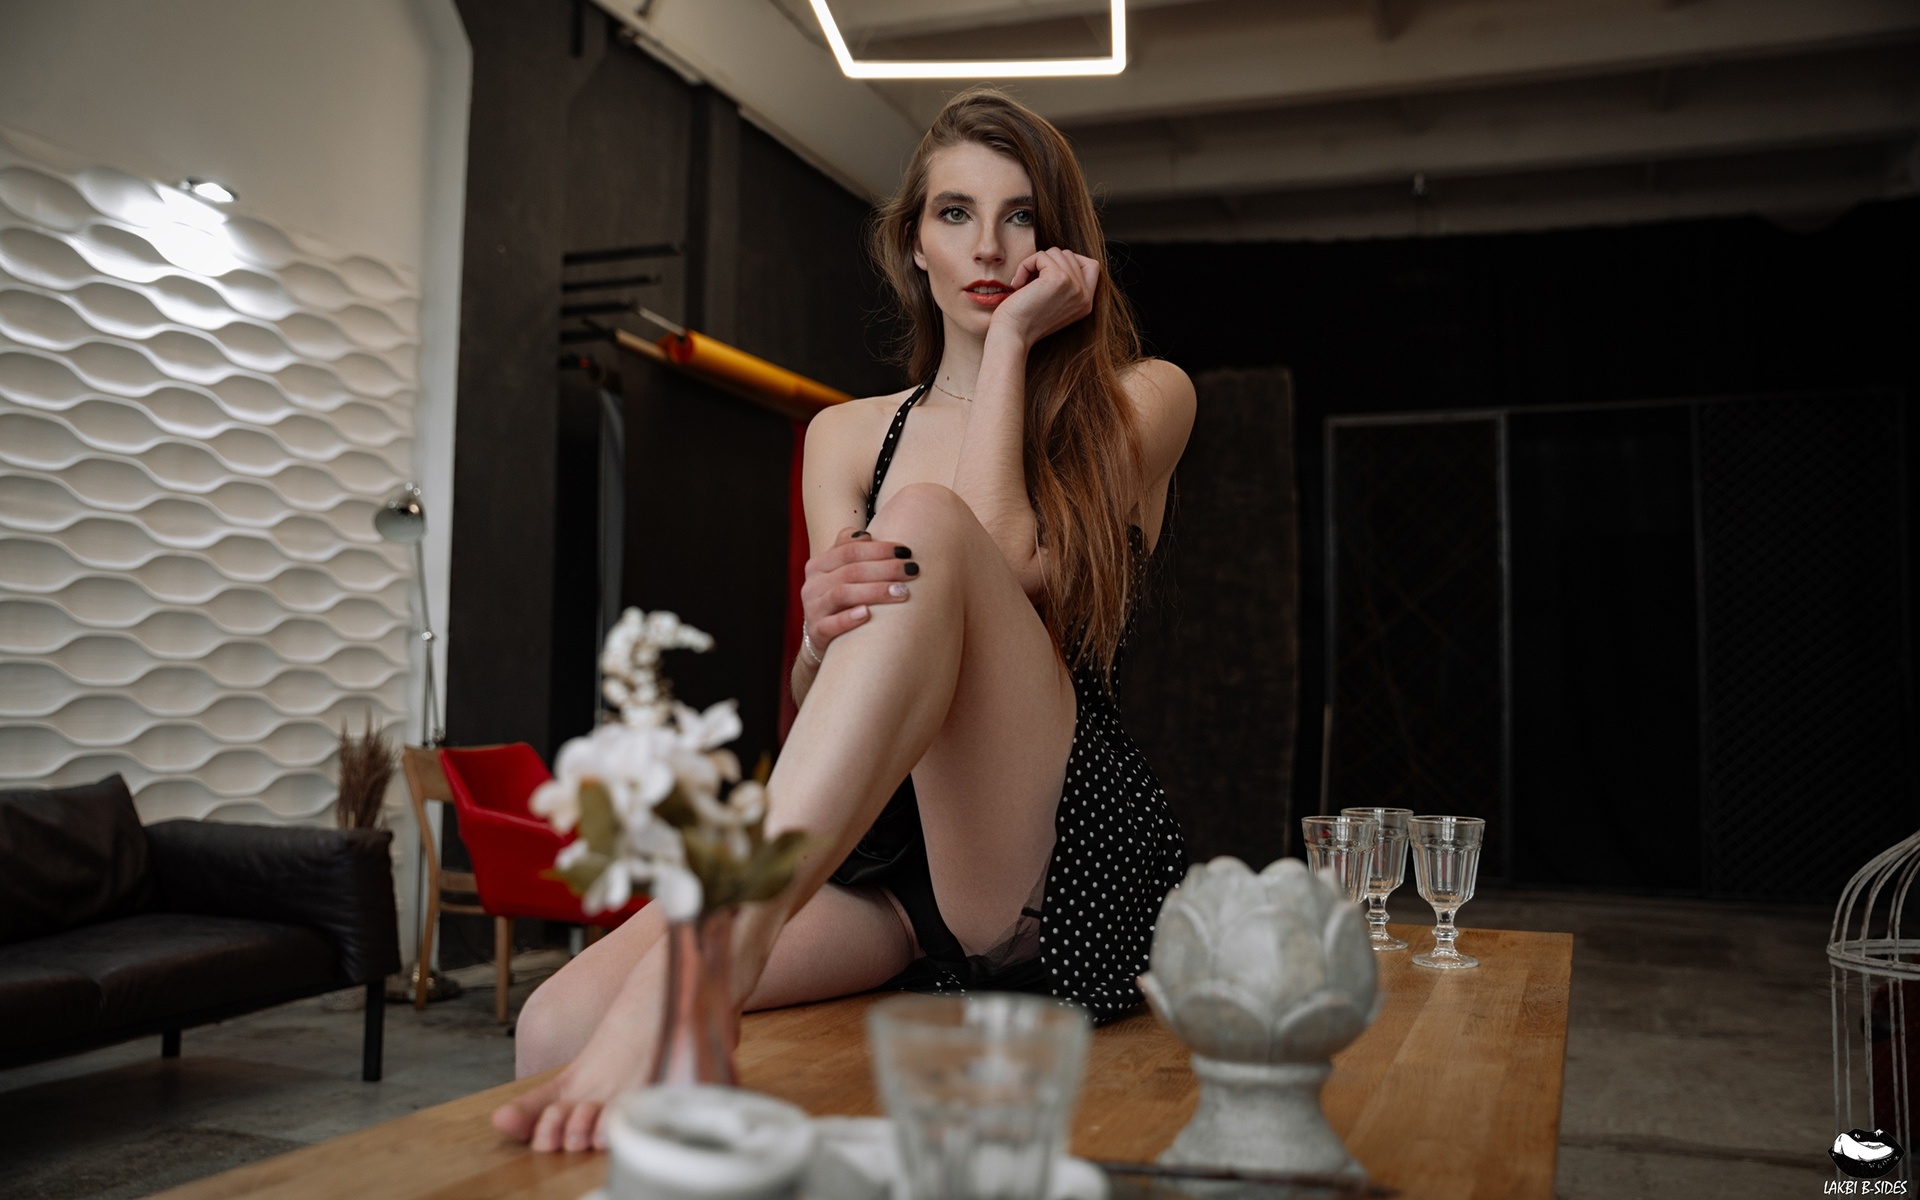 women, sitting, black panties, couch, women indoors, table, chair, drinking glass, dress, polka dots, painted nails, black dress, red lipstick